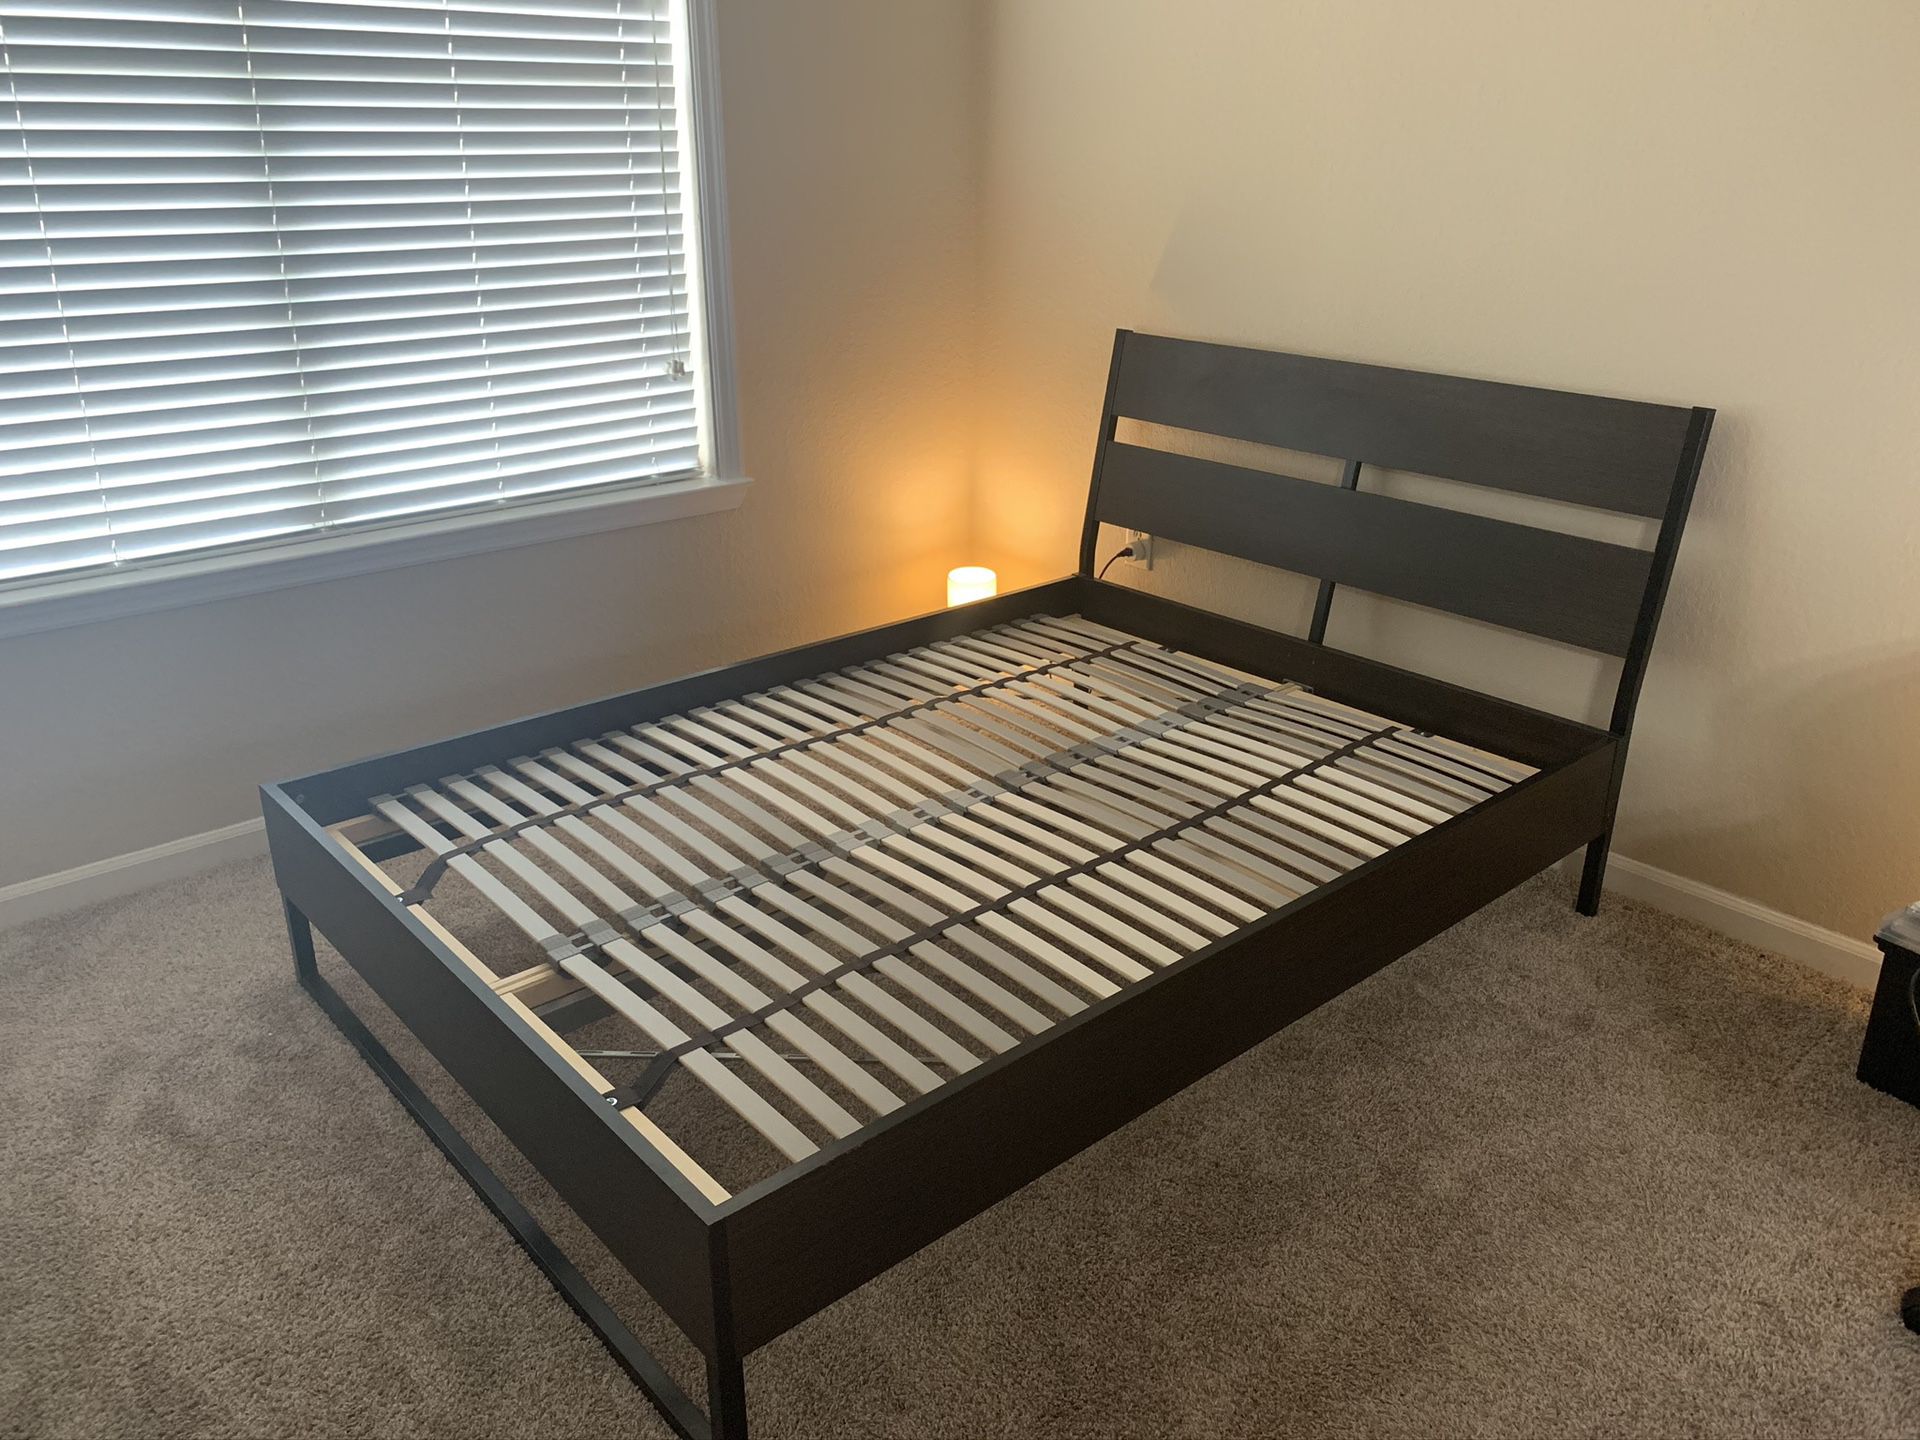 IKEA TRYSIL Full/Double Bed (Frame and Base Only)